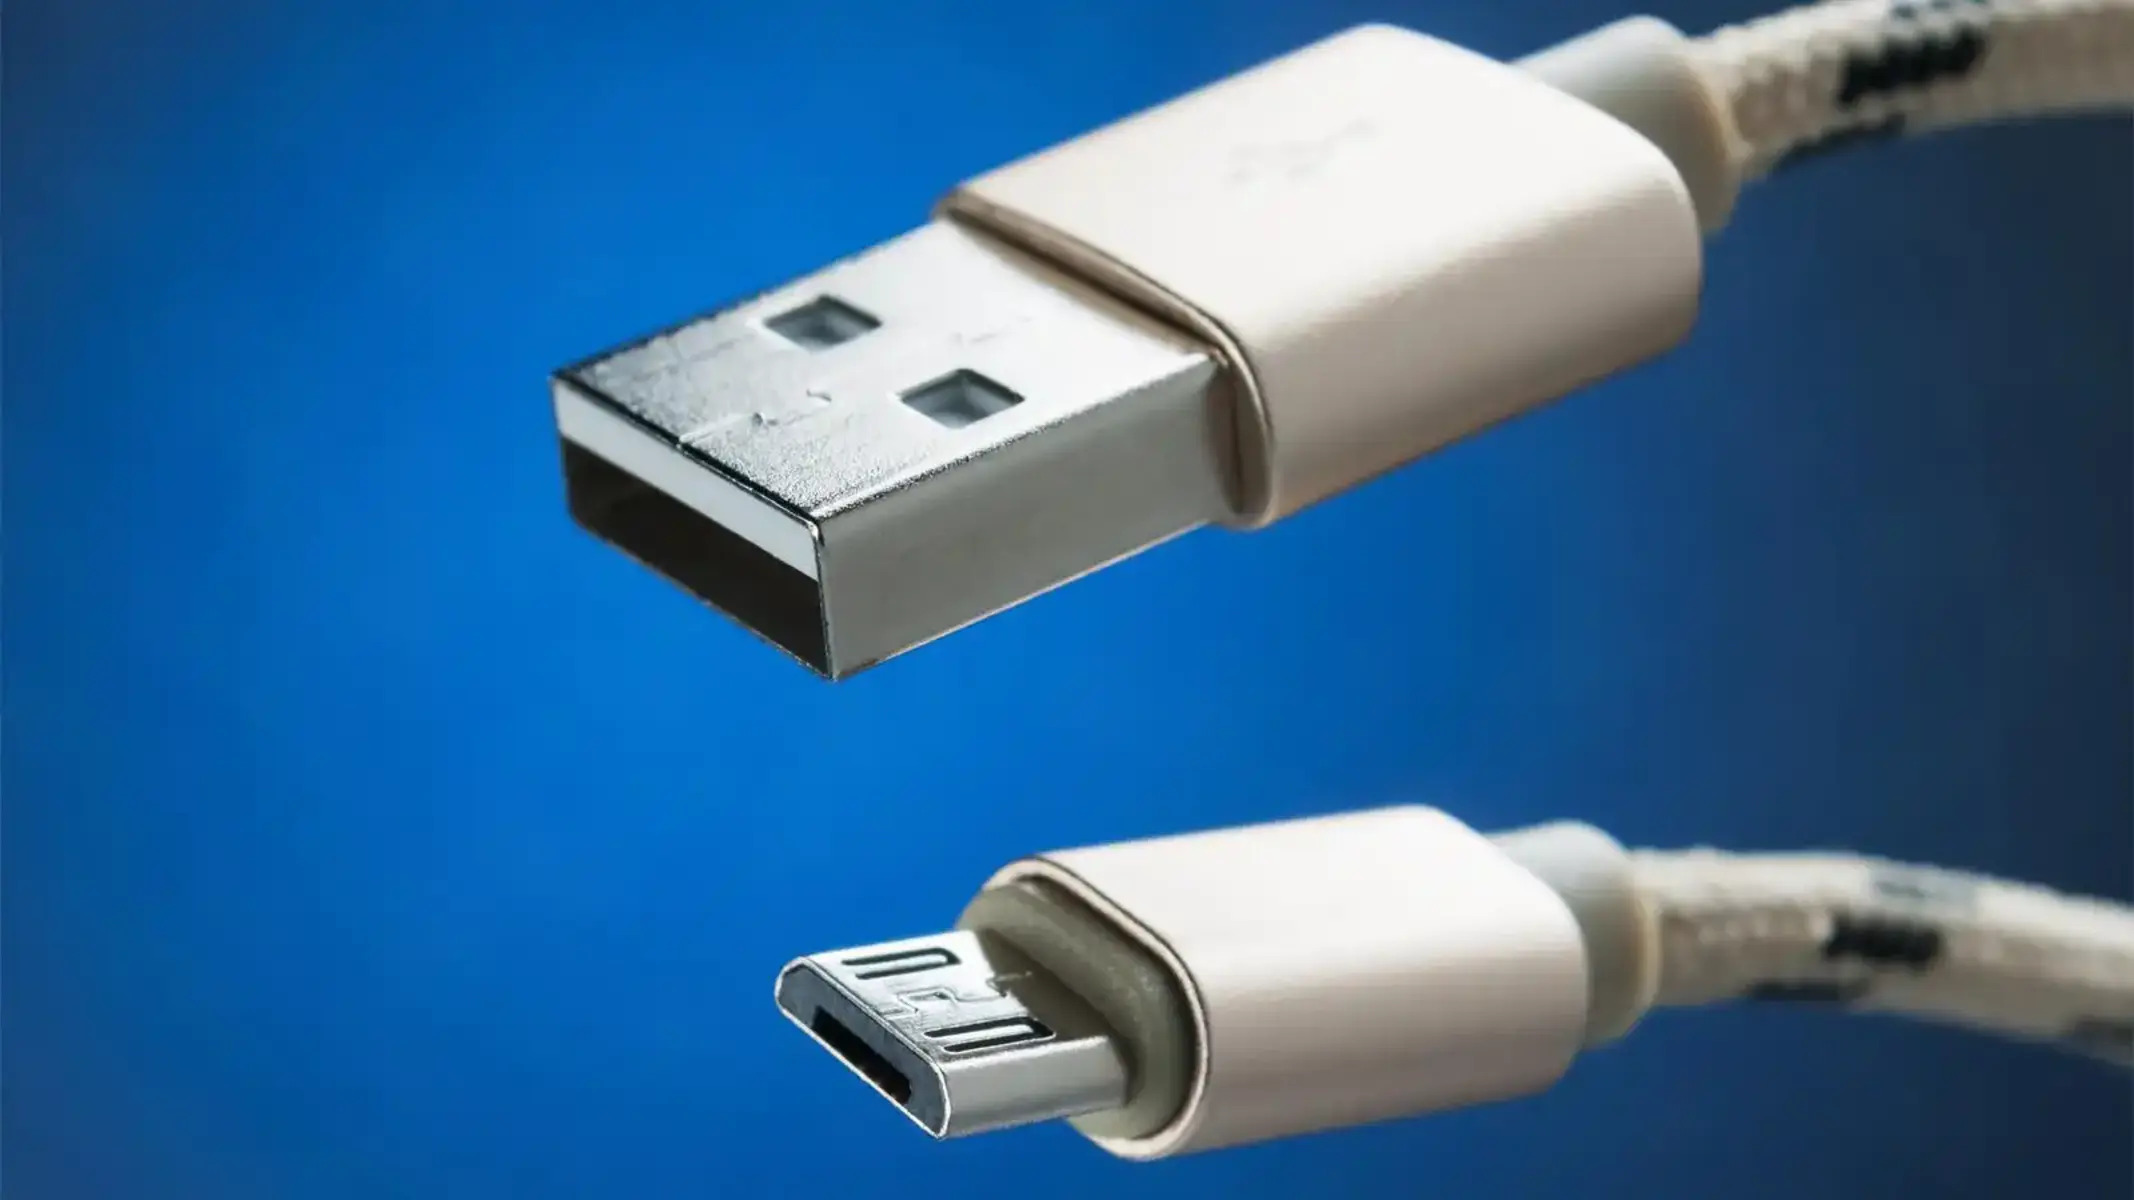 Troubleshooting And Fixing Micro USB Chargers: A Step-by-Step Guide